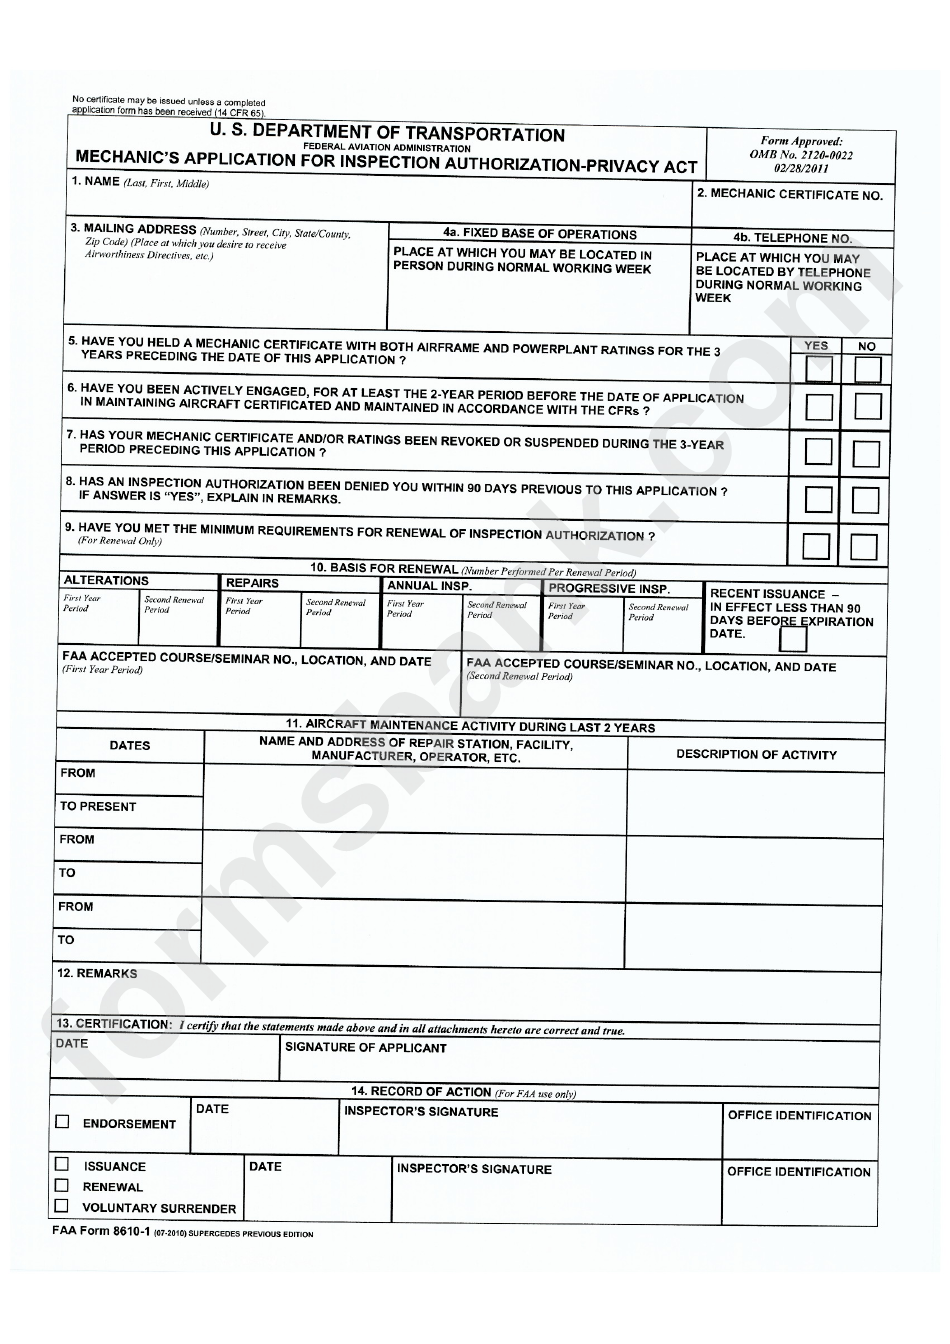 Inspection Authorization Renewal Form